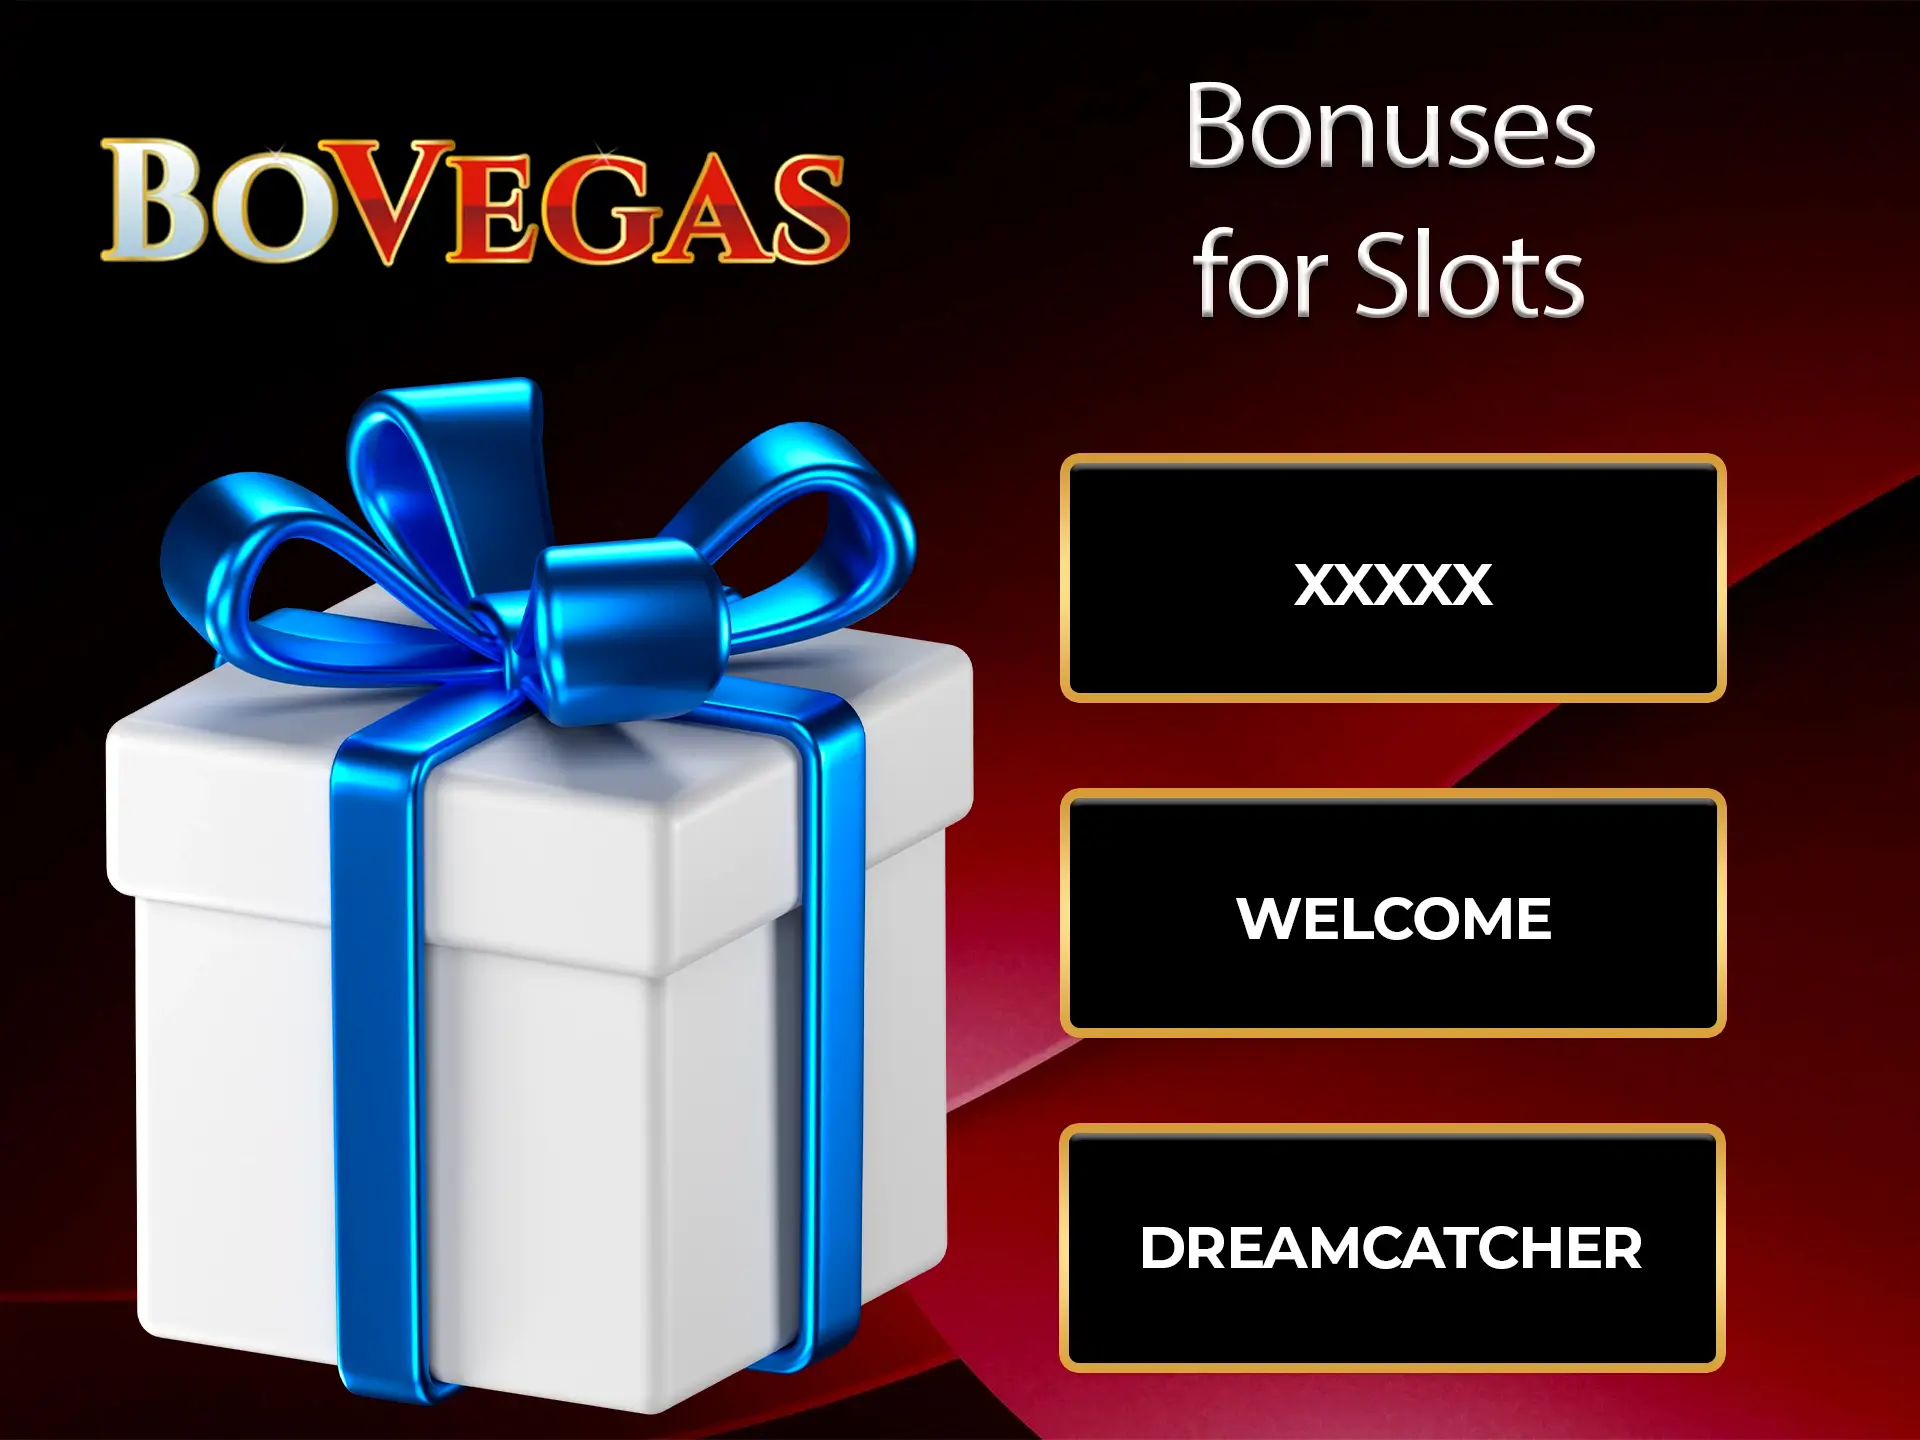 Don't forget to take advantage of promotions from BoVegas to maximise your winnings when you hit a bonus in slot games.